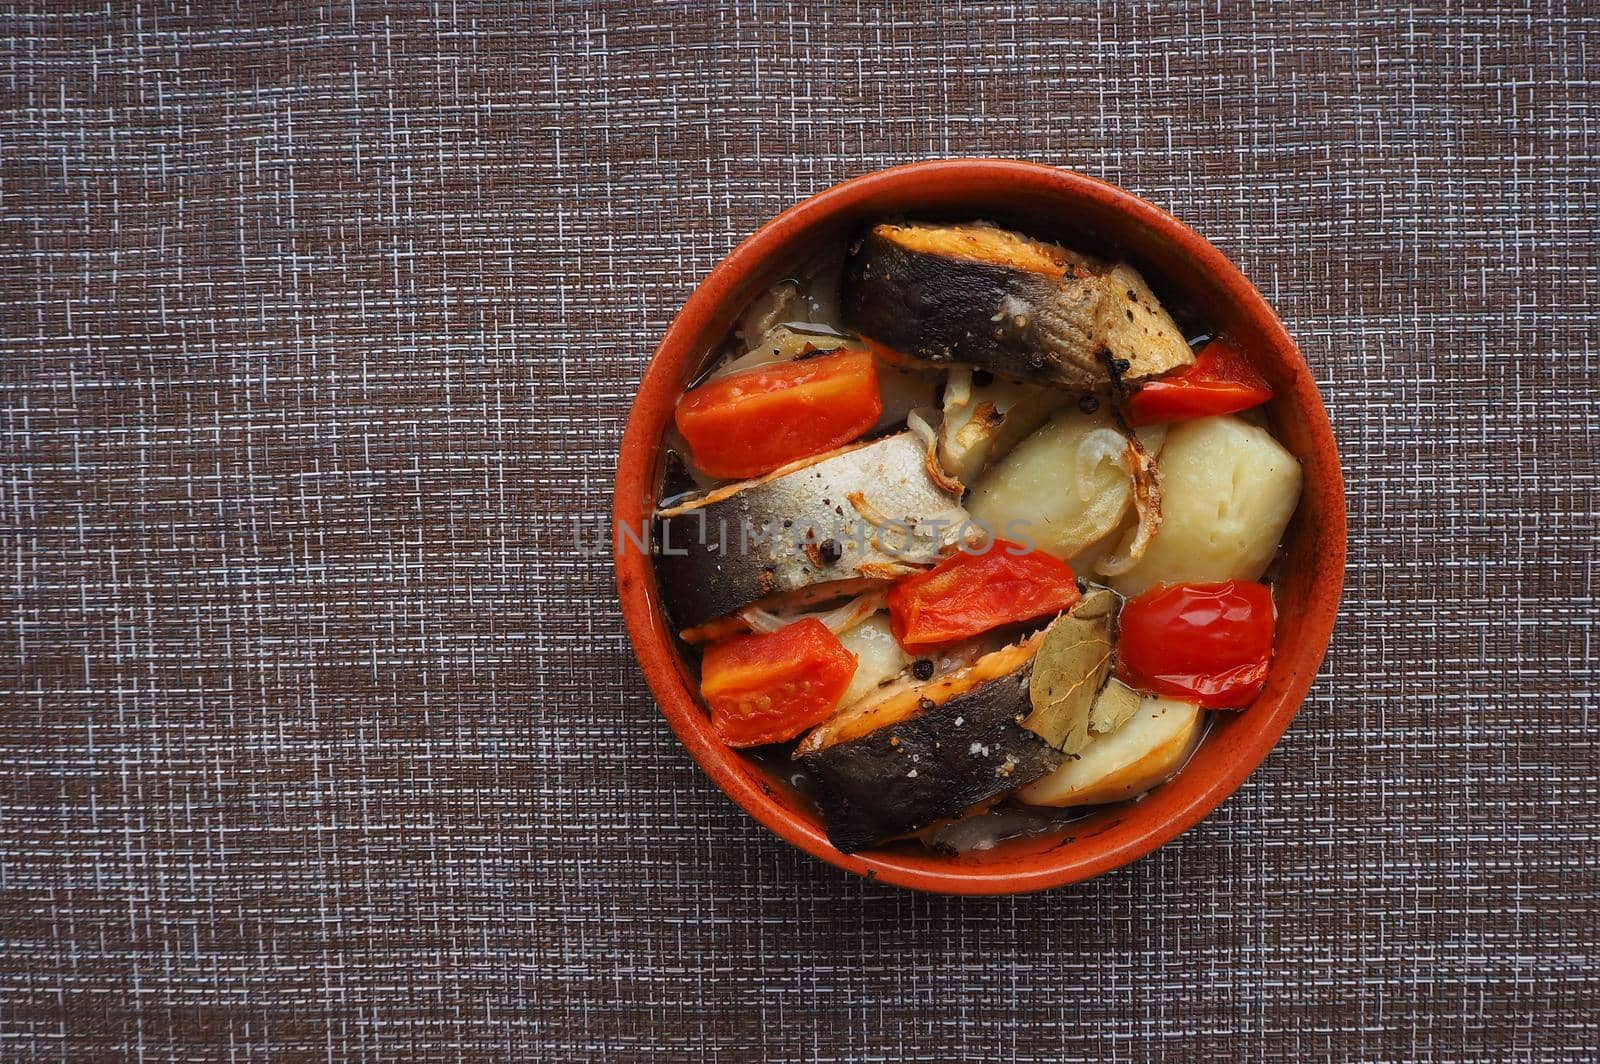 A dish of fish with vegetables. by Olga26